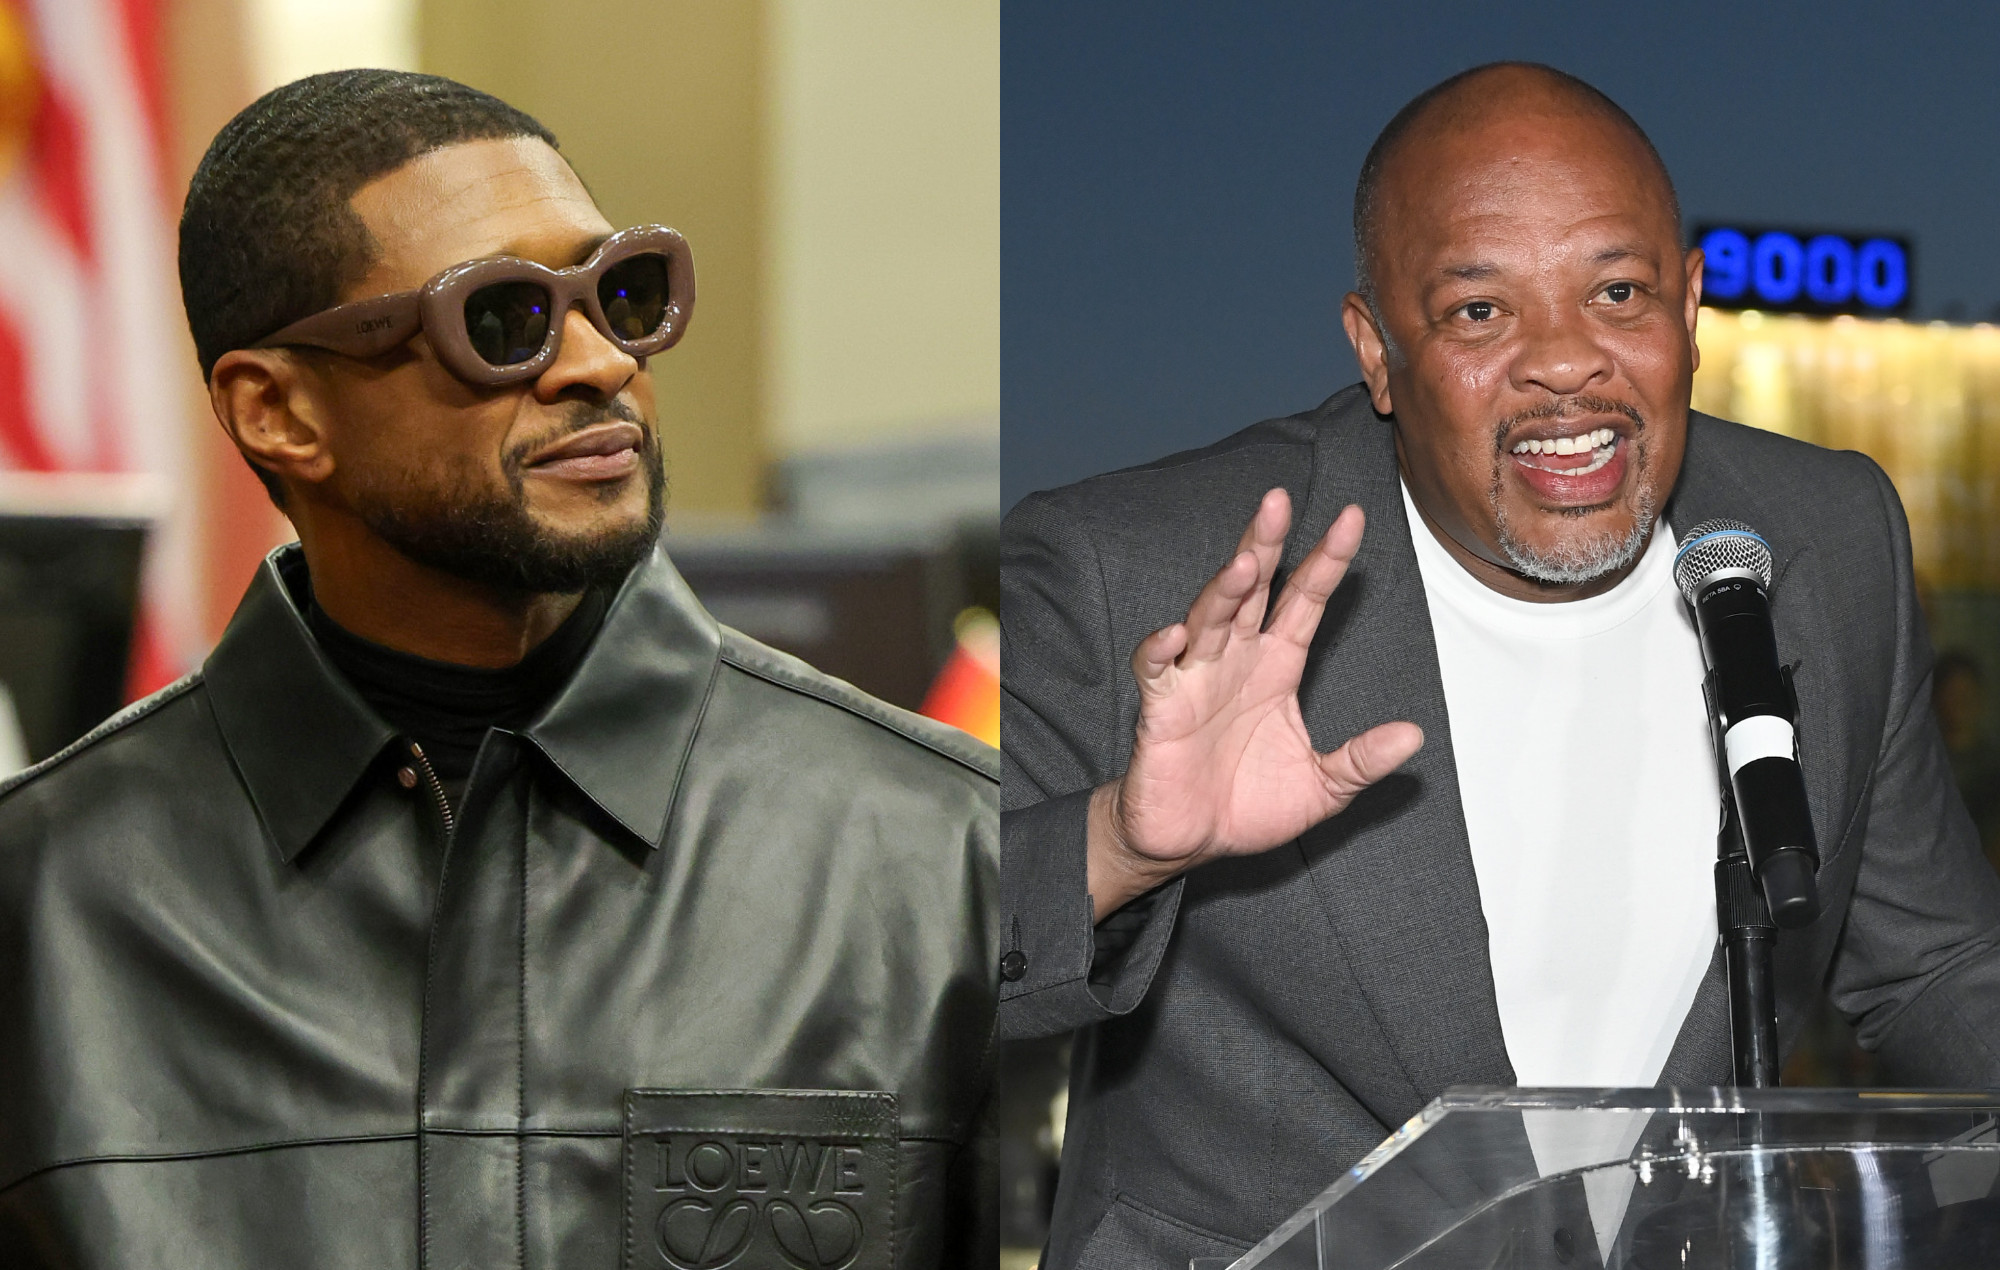 Usher shows love to Dr Dre at recent Las Vegas show